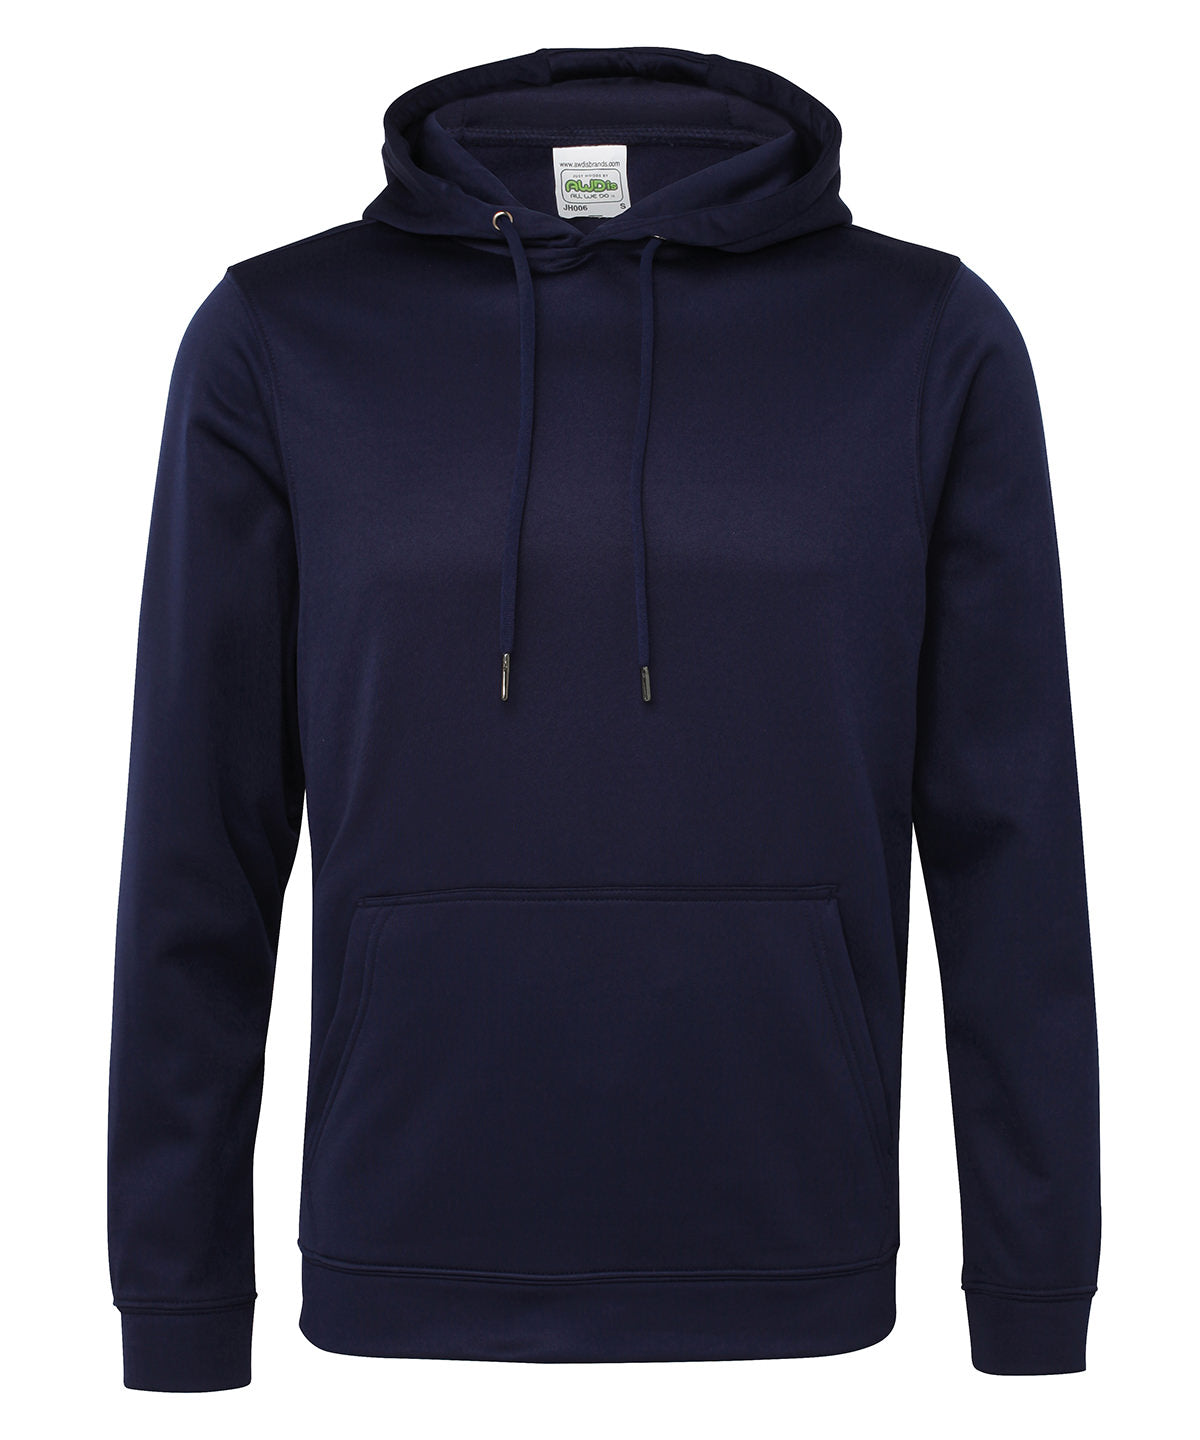 Sports polyester hoodie